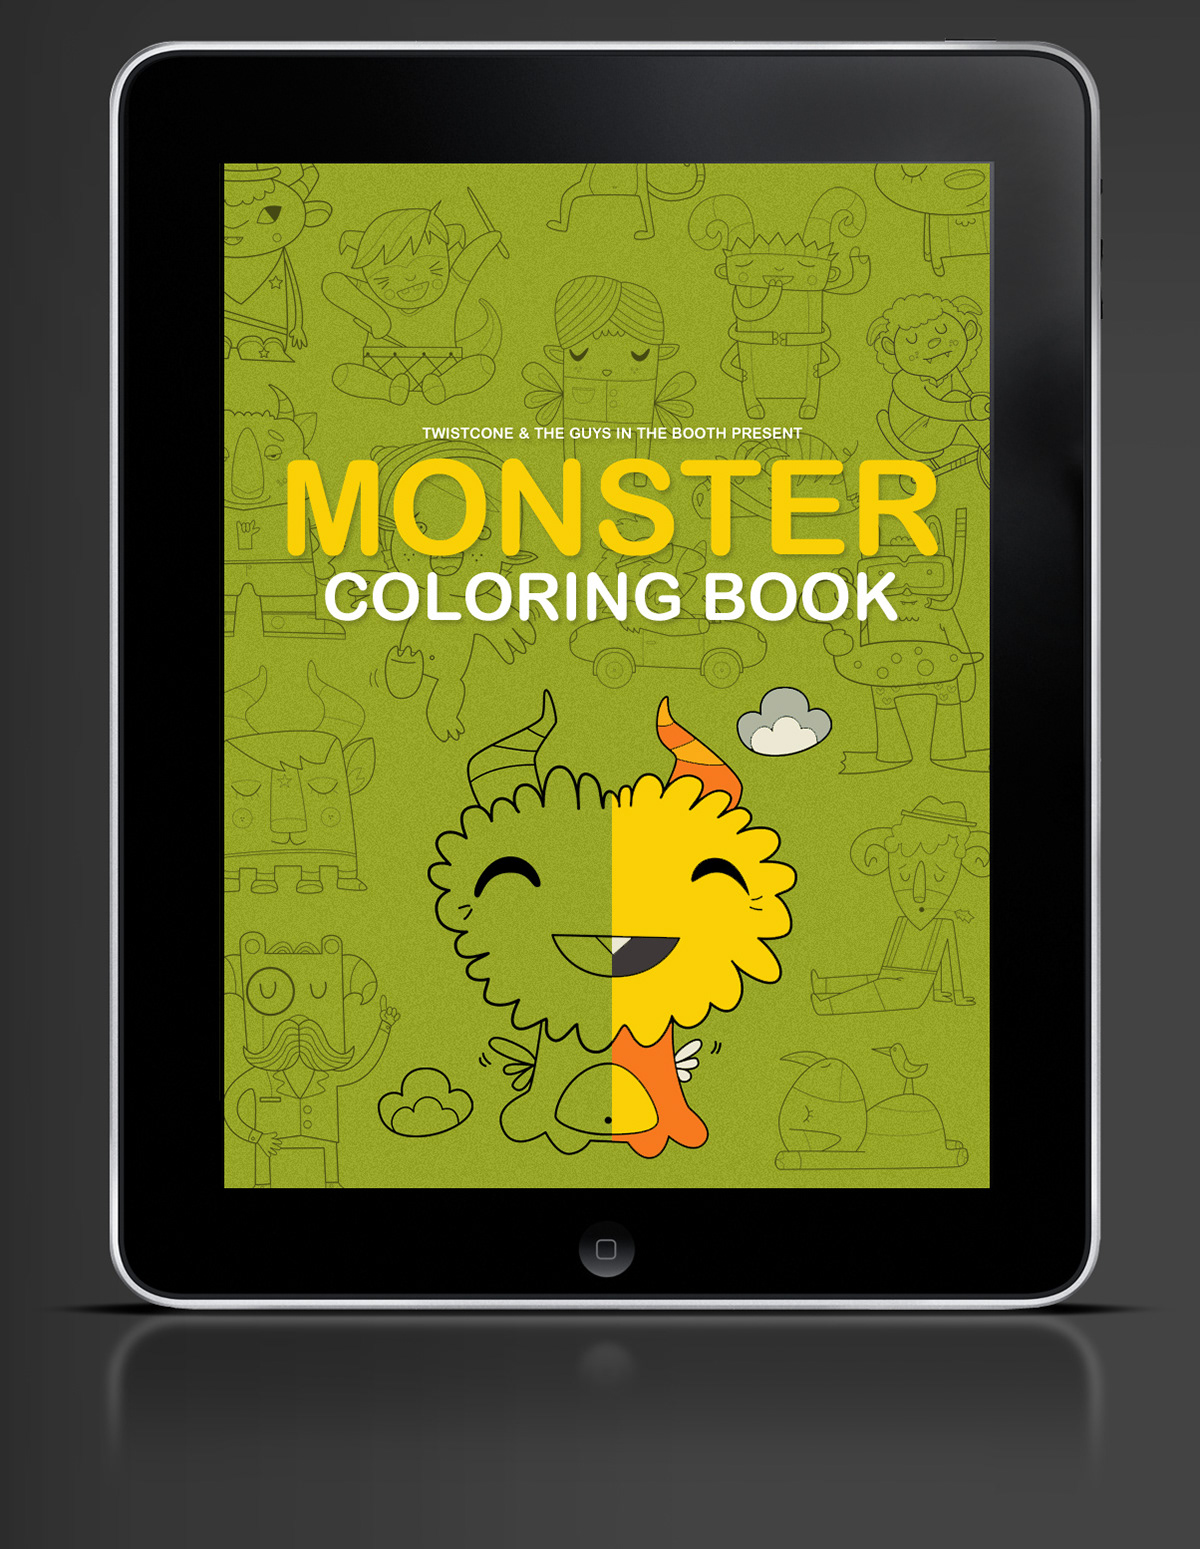 monster coloring book iphone iPad Interface app application ios